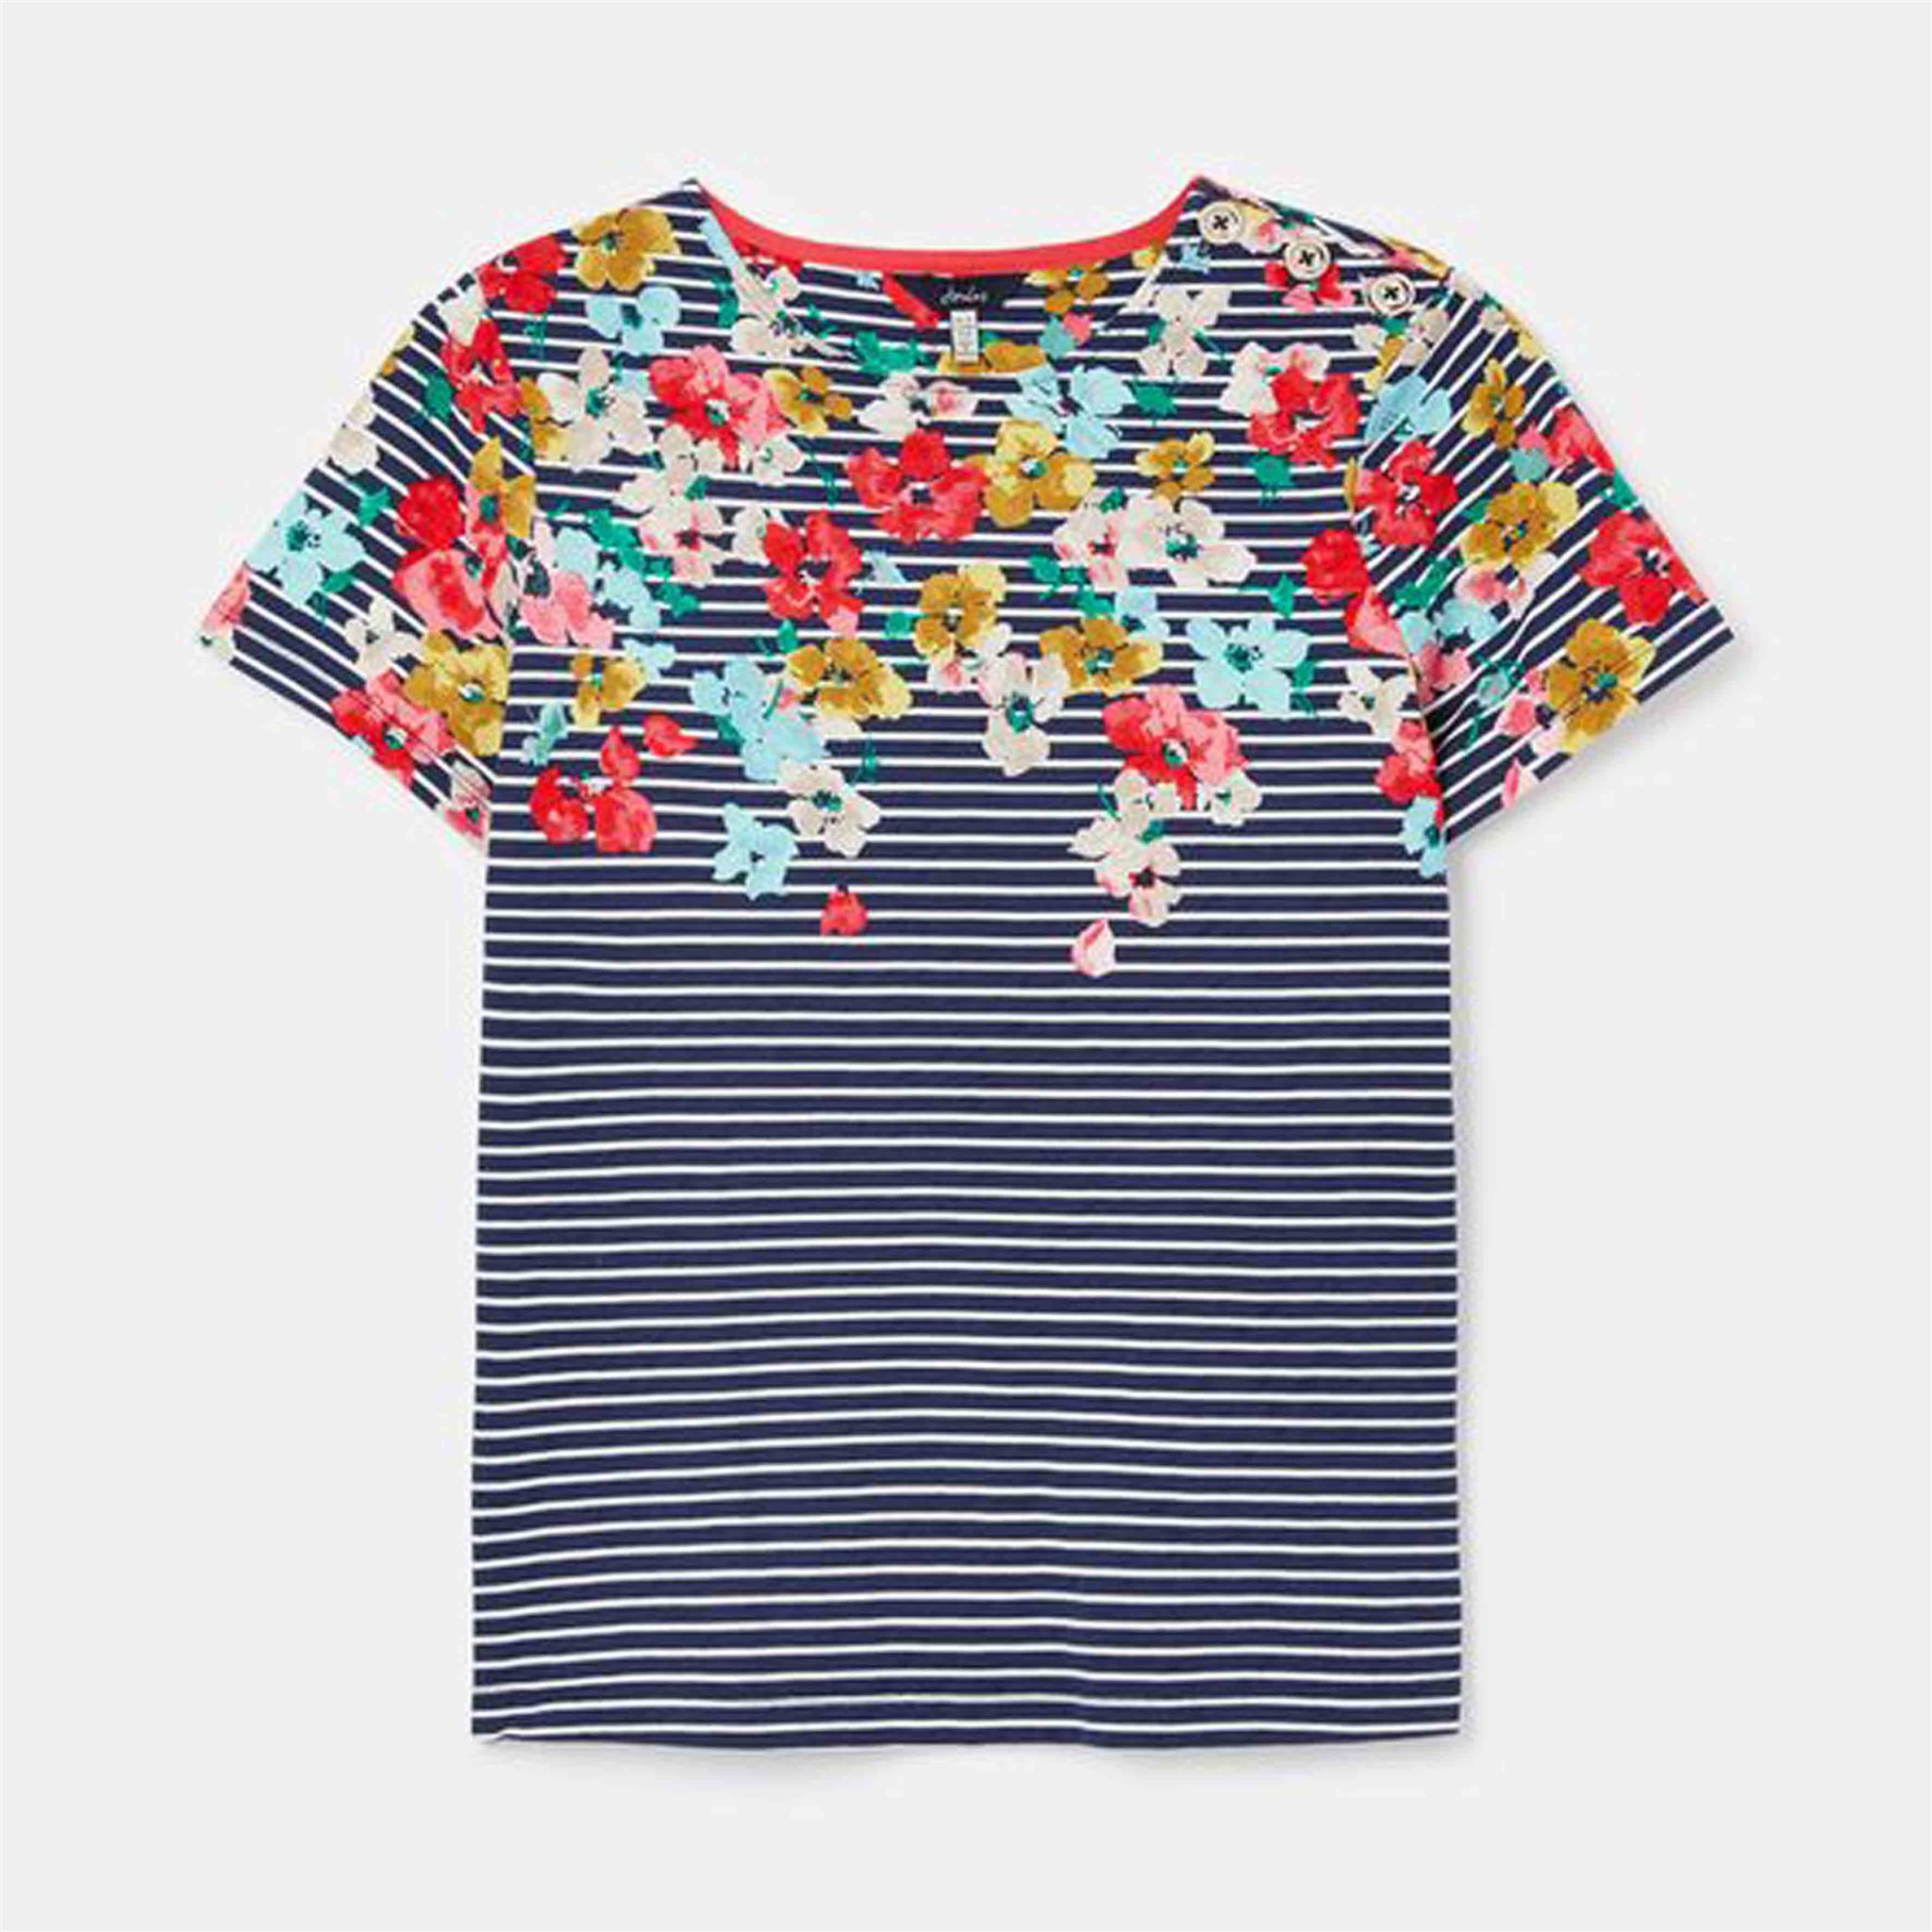 SS HARBOUR PRINT JOULES